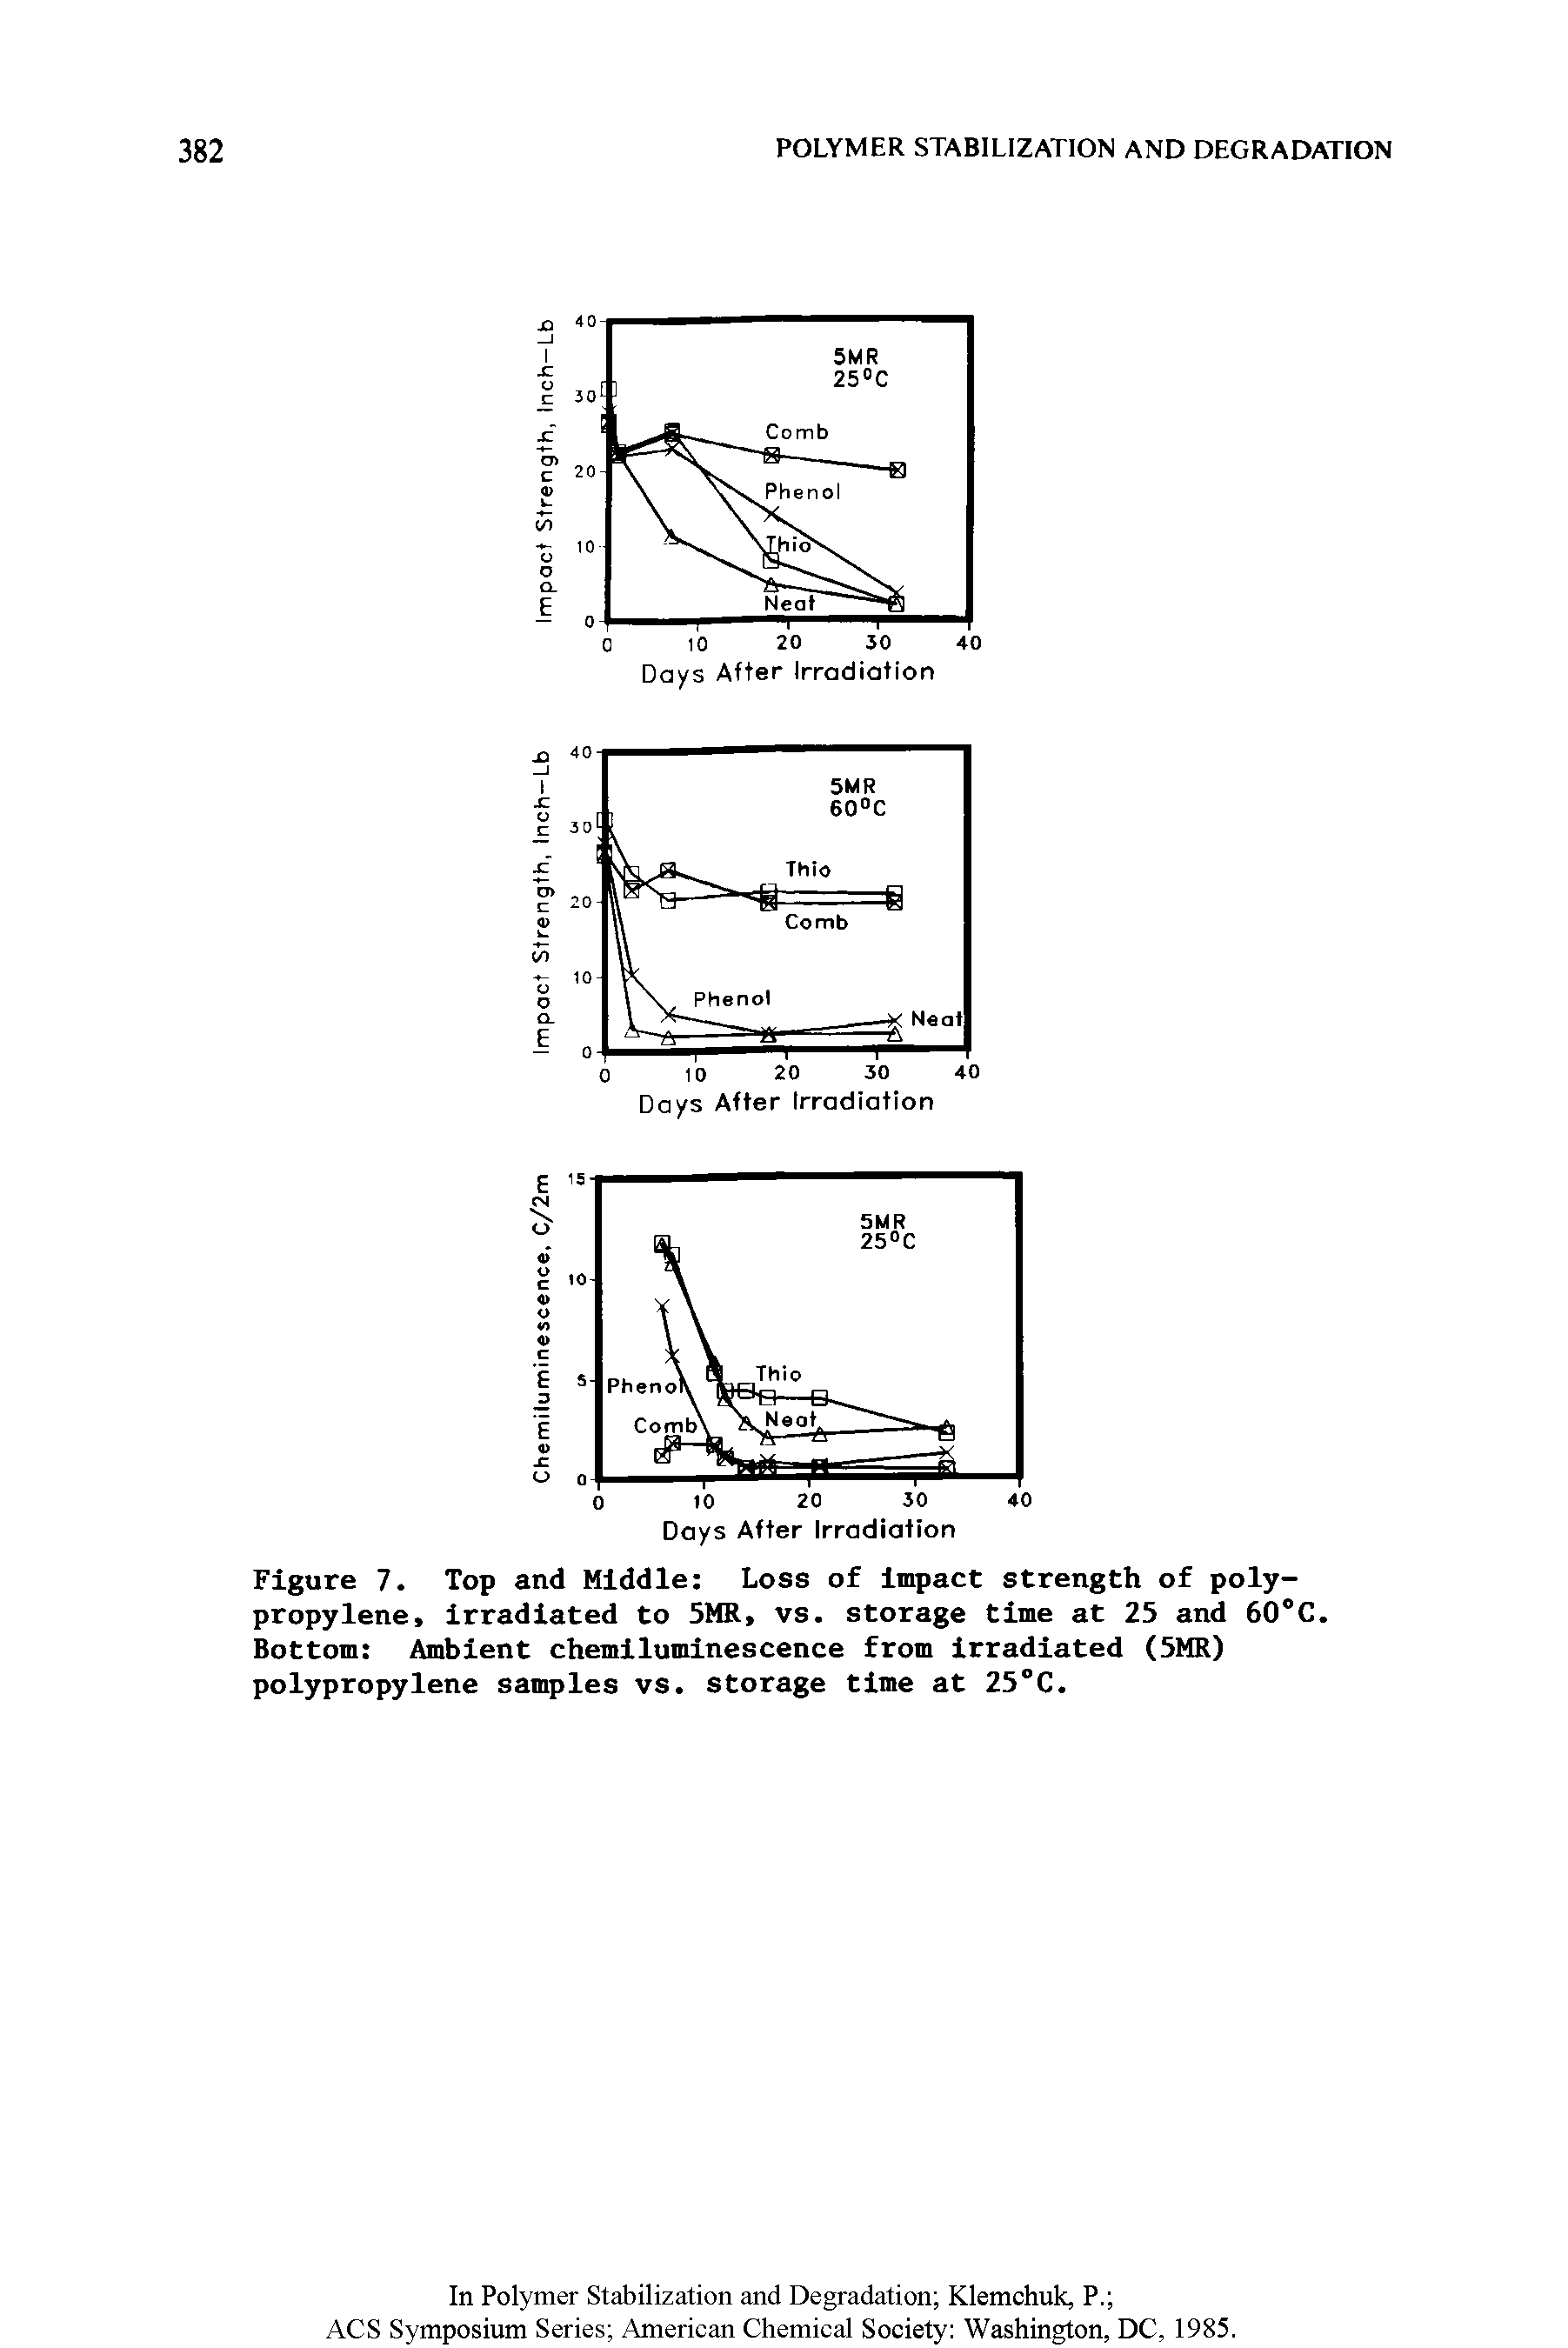 Figure 7. Top and Middle Loss of impact strength of polypropylene, irradiated to 5MR, vs. storage time at 25 and 60°C. Bottom Ambient chemiluminescence from irradiated (5MR) polypropylene samples vs. storage time at 25°C.